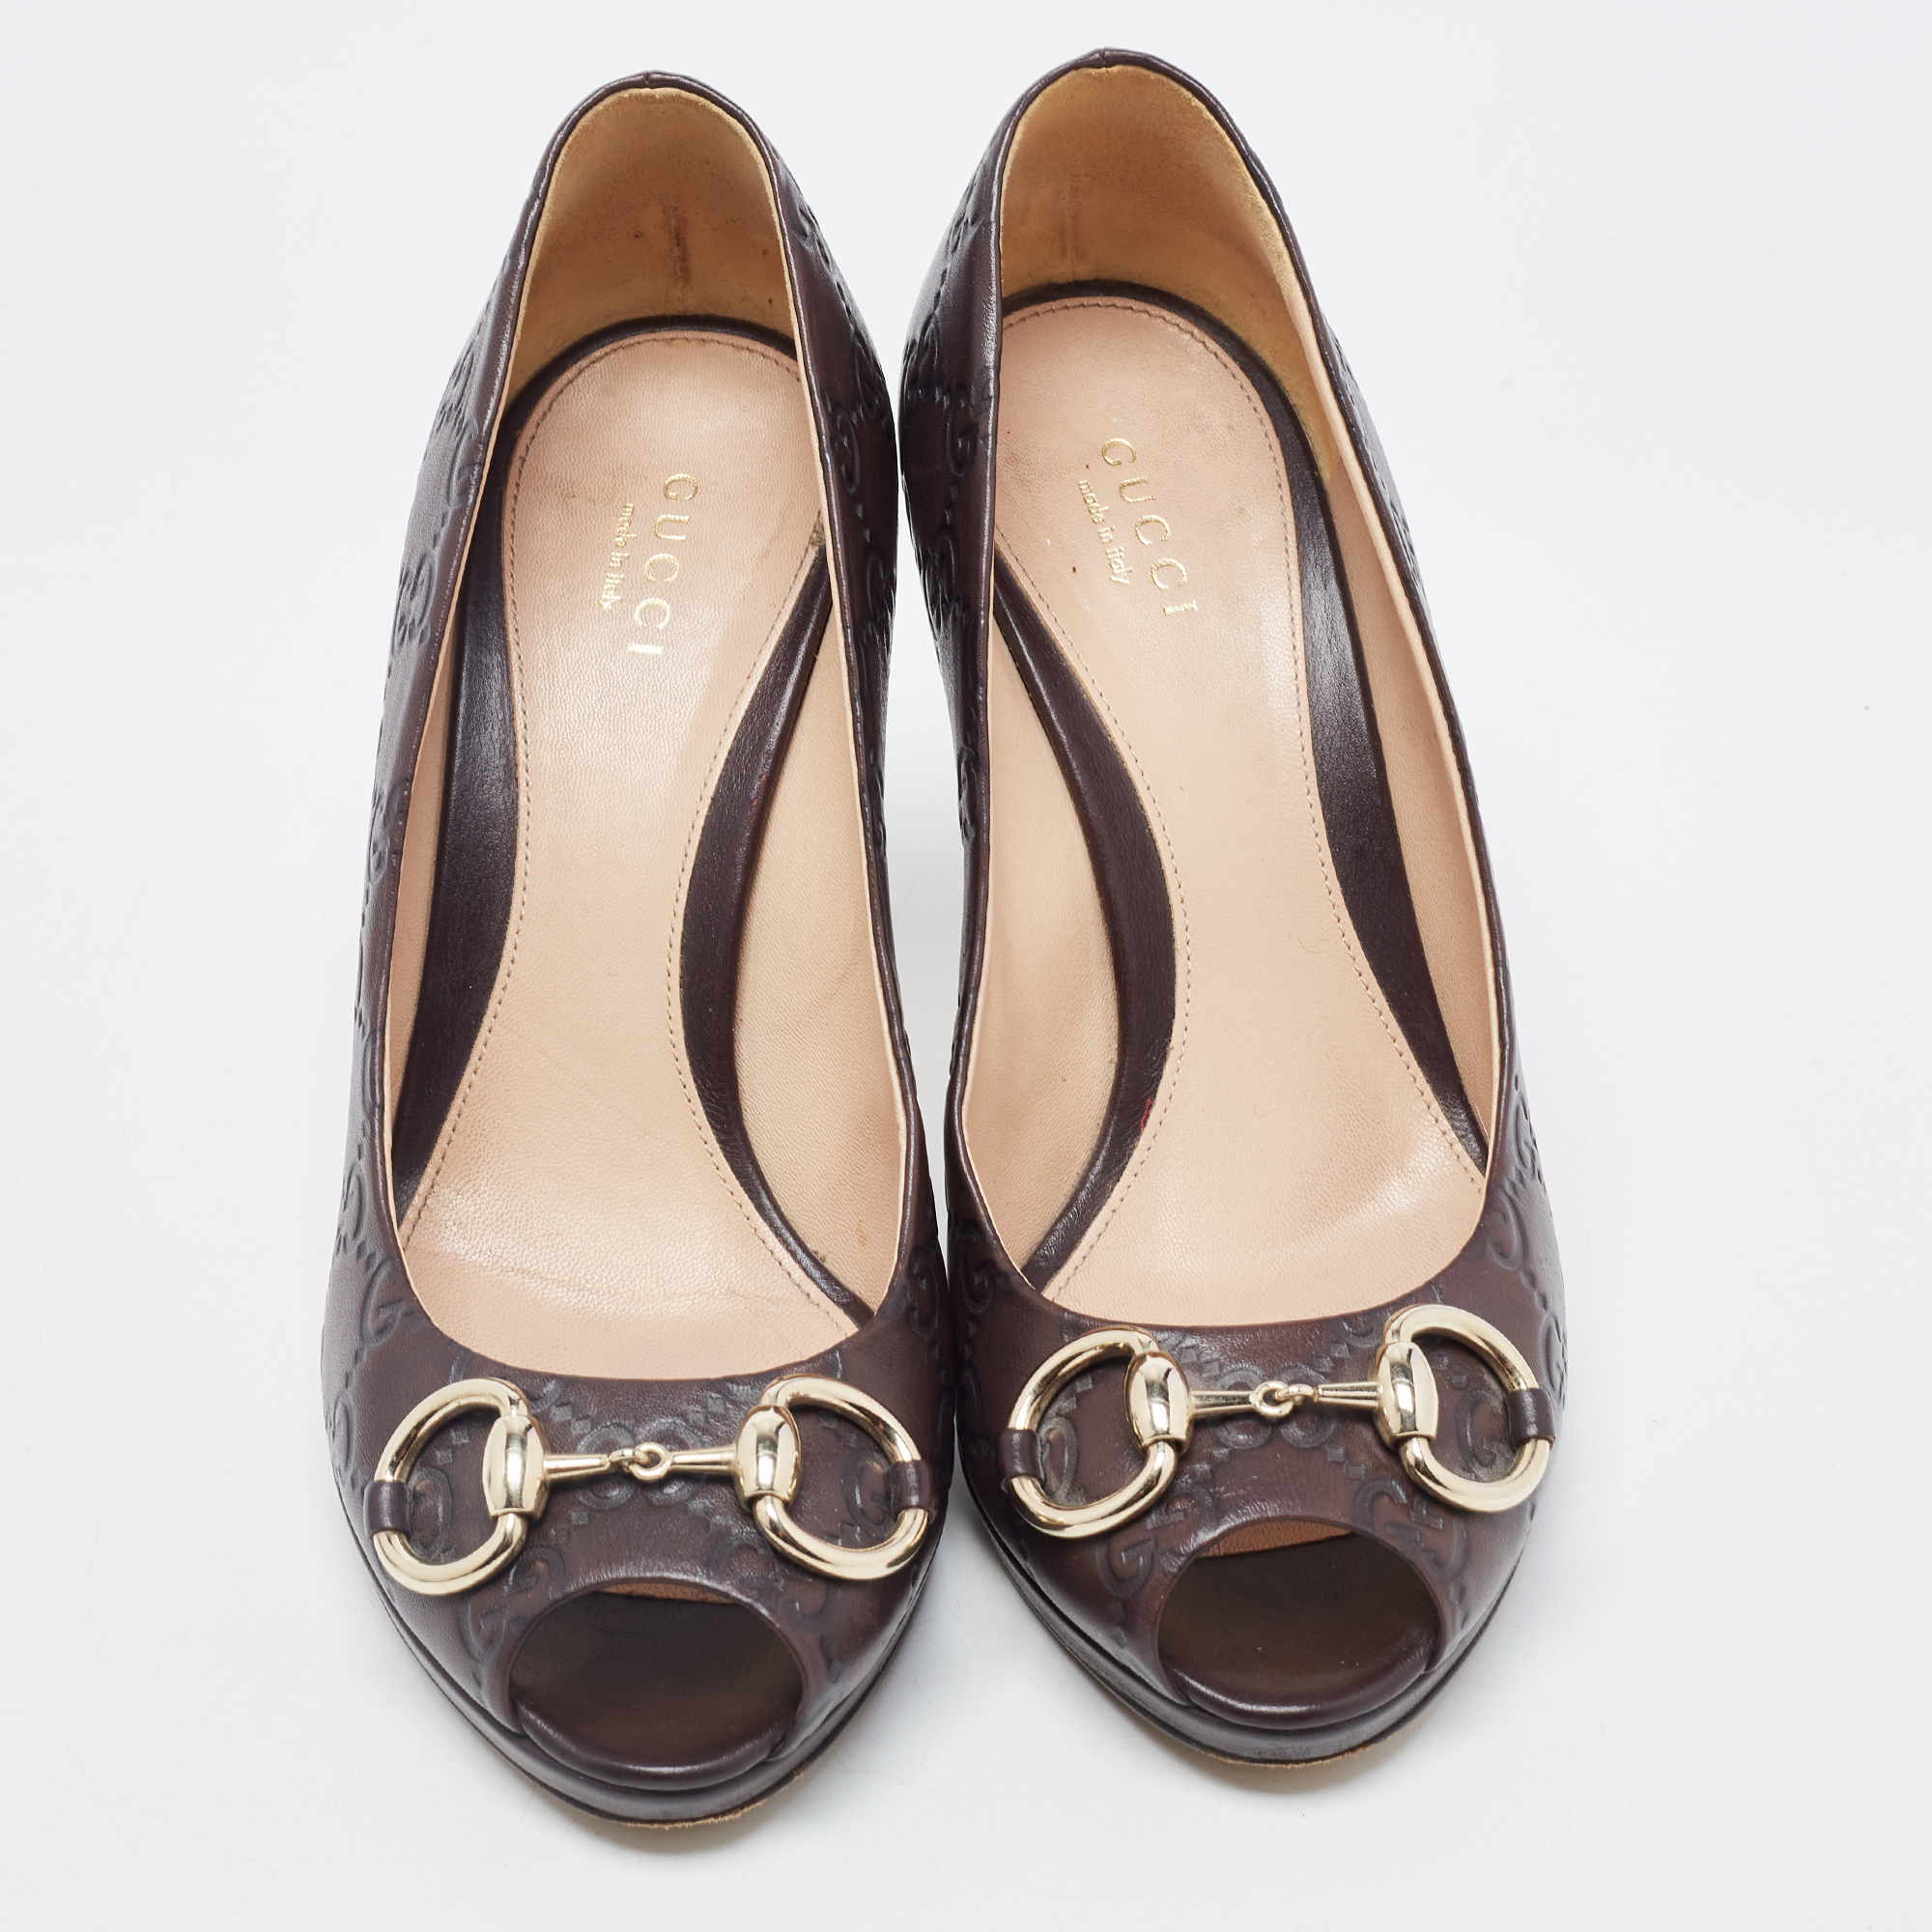 Gucci Dark Brown Guccissima Leather New Hollywood Pumps Size 37